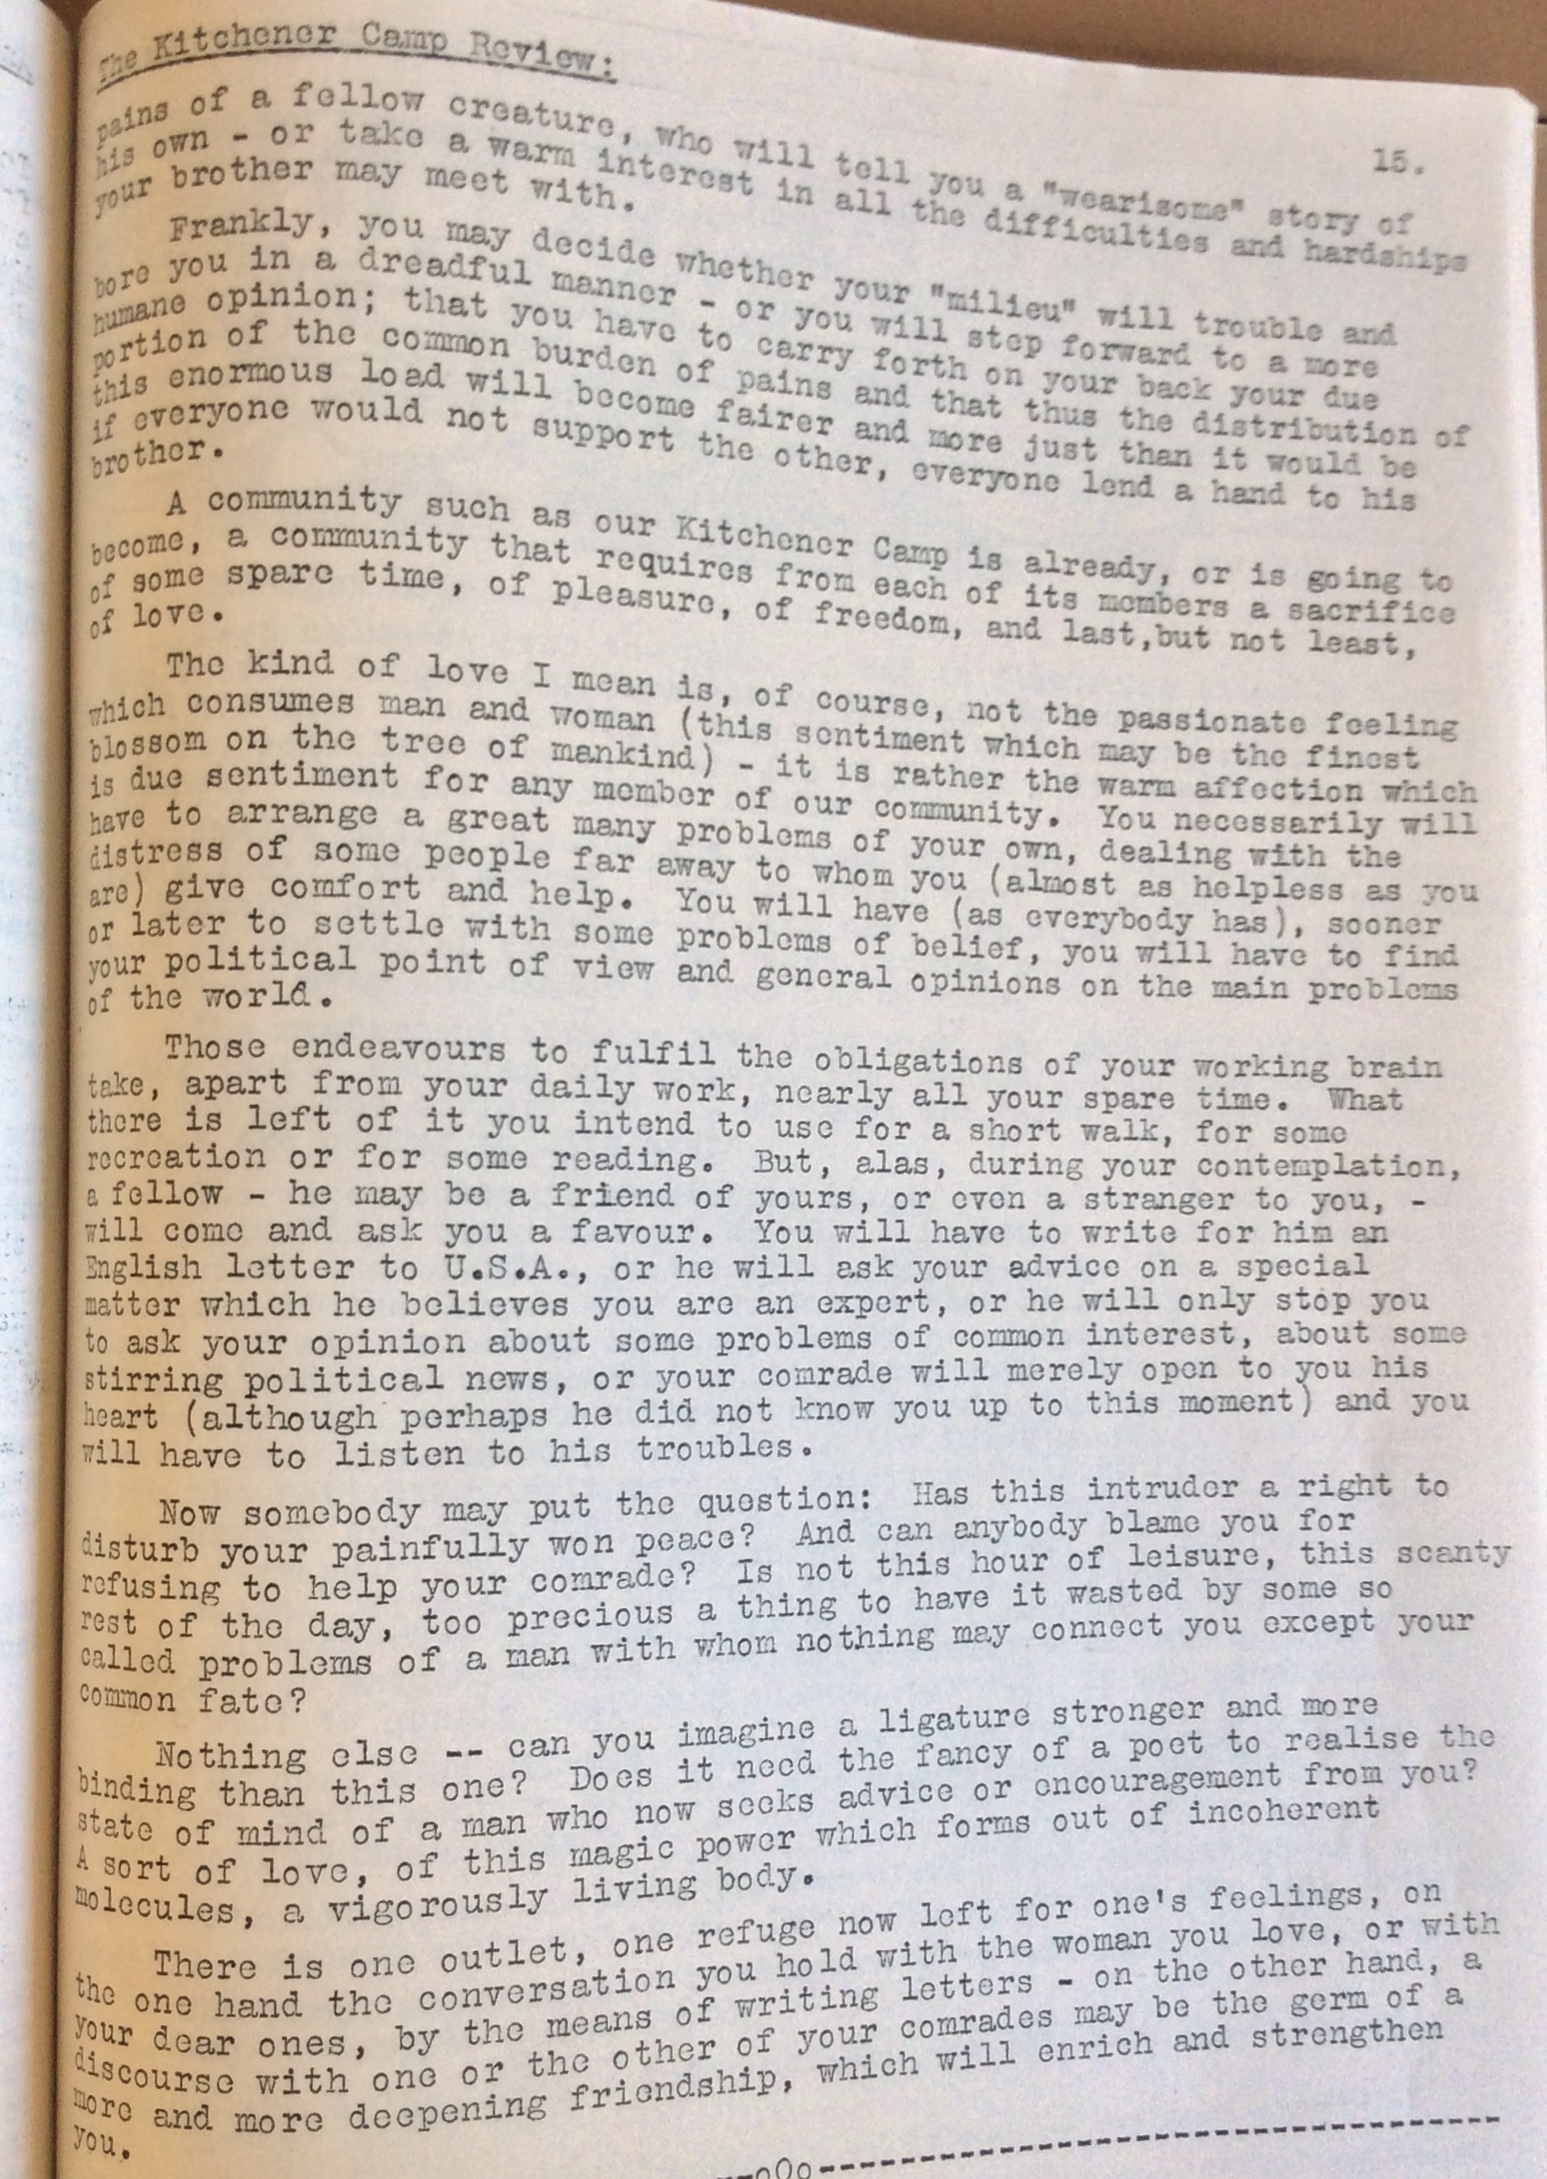 The Kitchener Camp Review, July 1939, No. 5, page 15, top